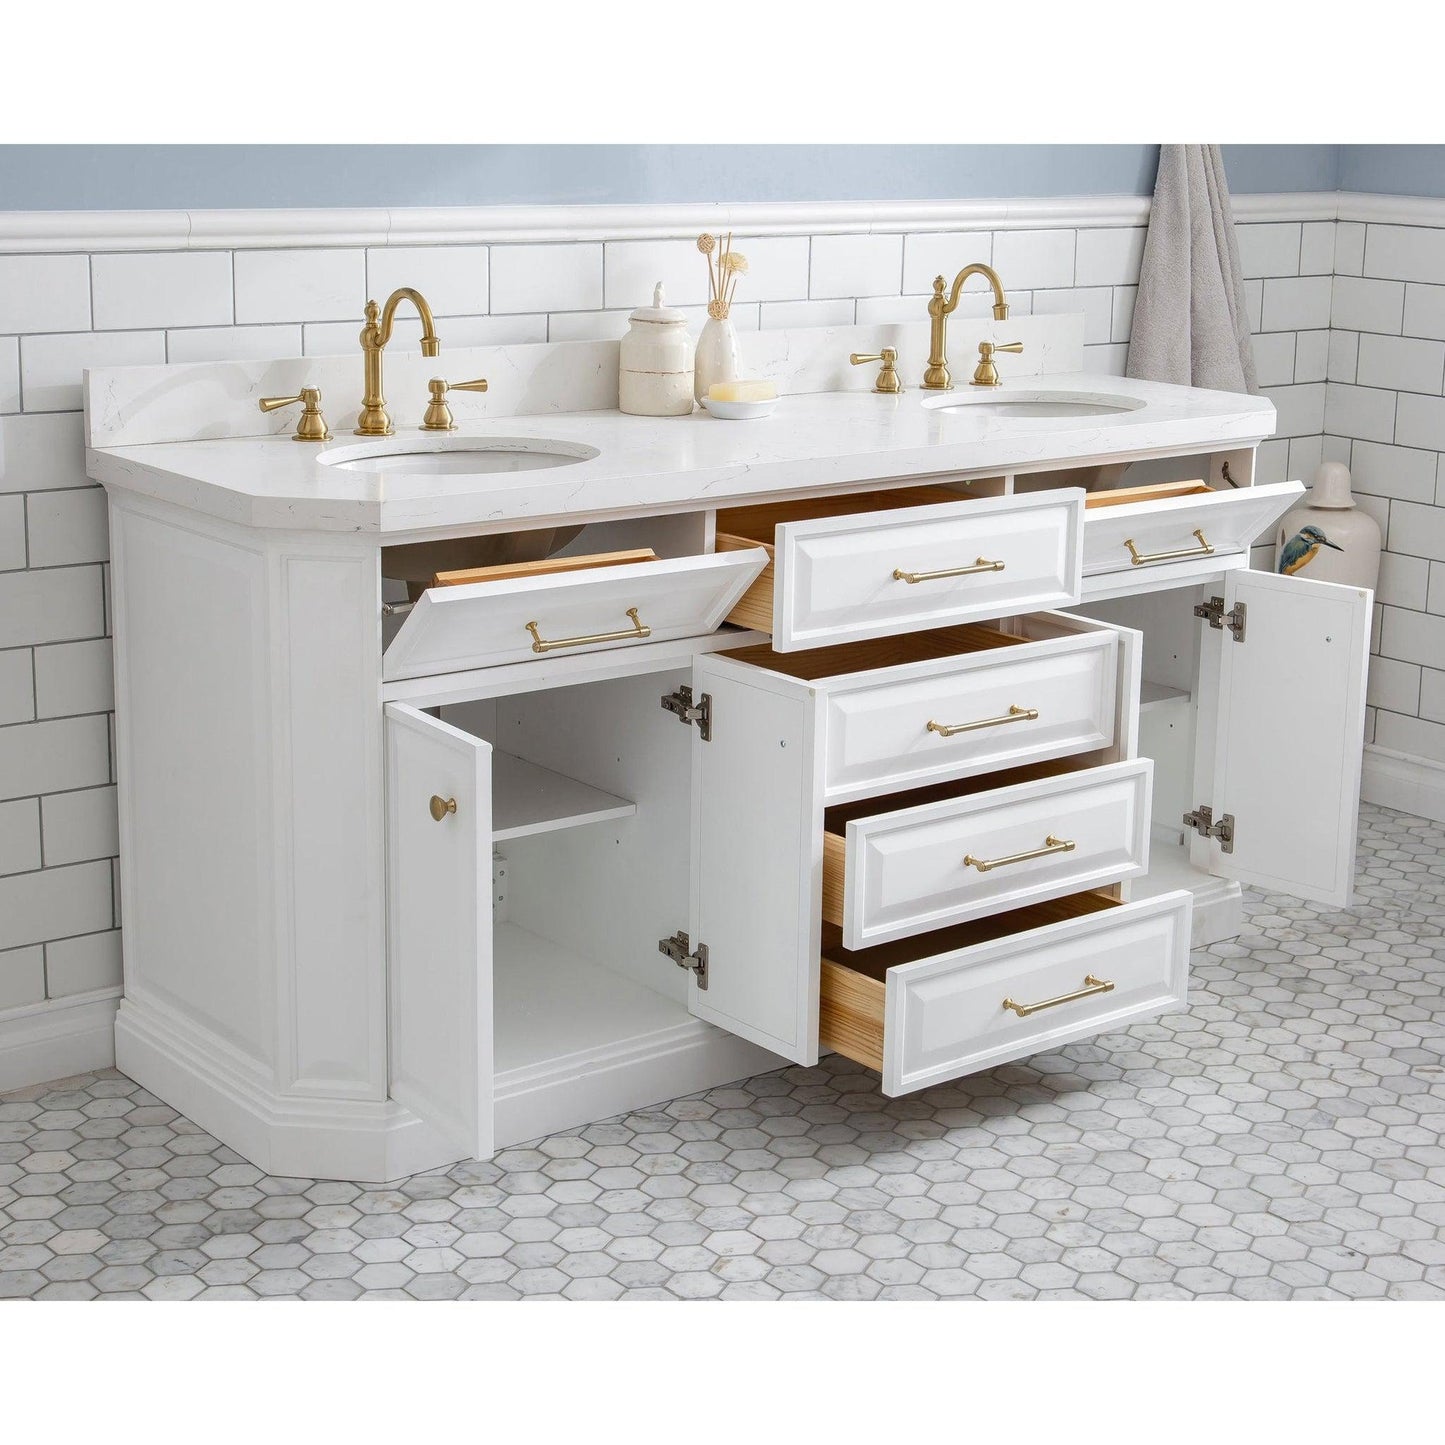 Water Creation Palace 72" Quartz Carrara Pure White Bathroom Vanity Set With Hardware And F2-0012 Faucets in Satin Gold Finish And Only Mirrors in Chrome Finish